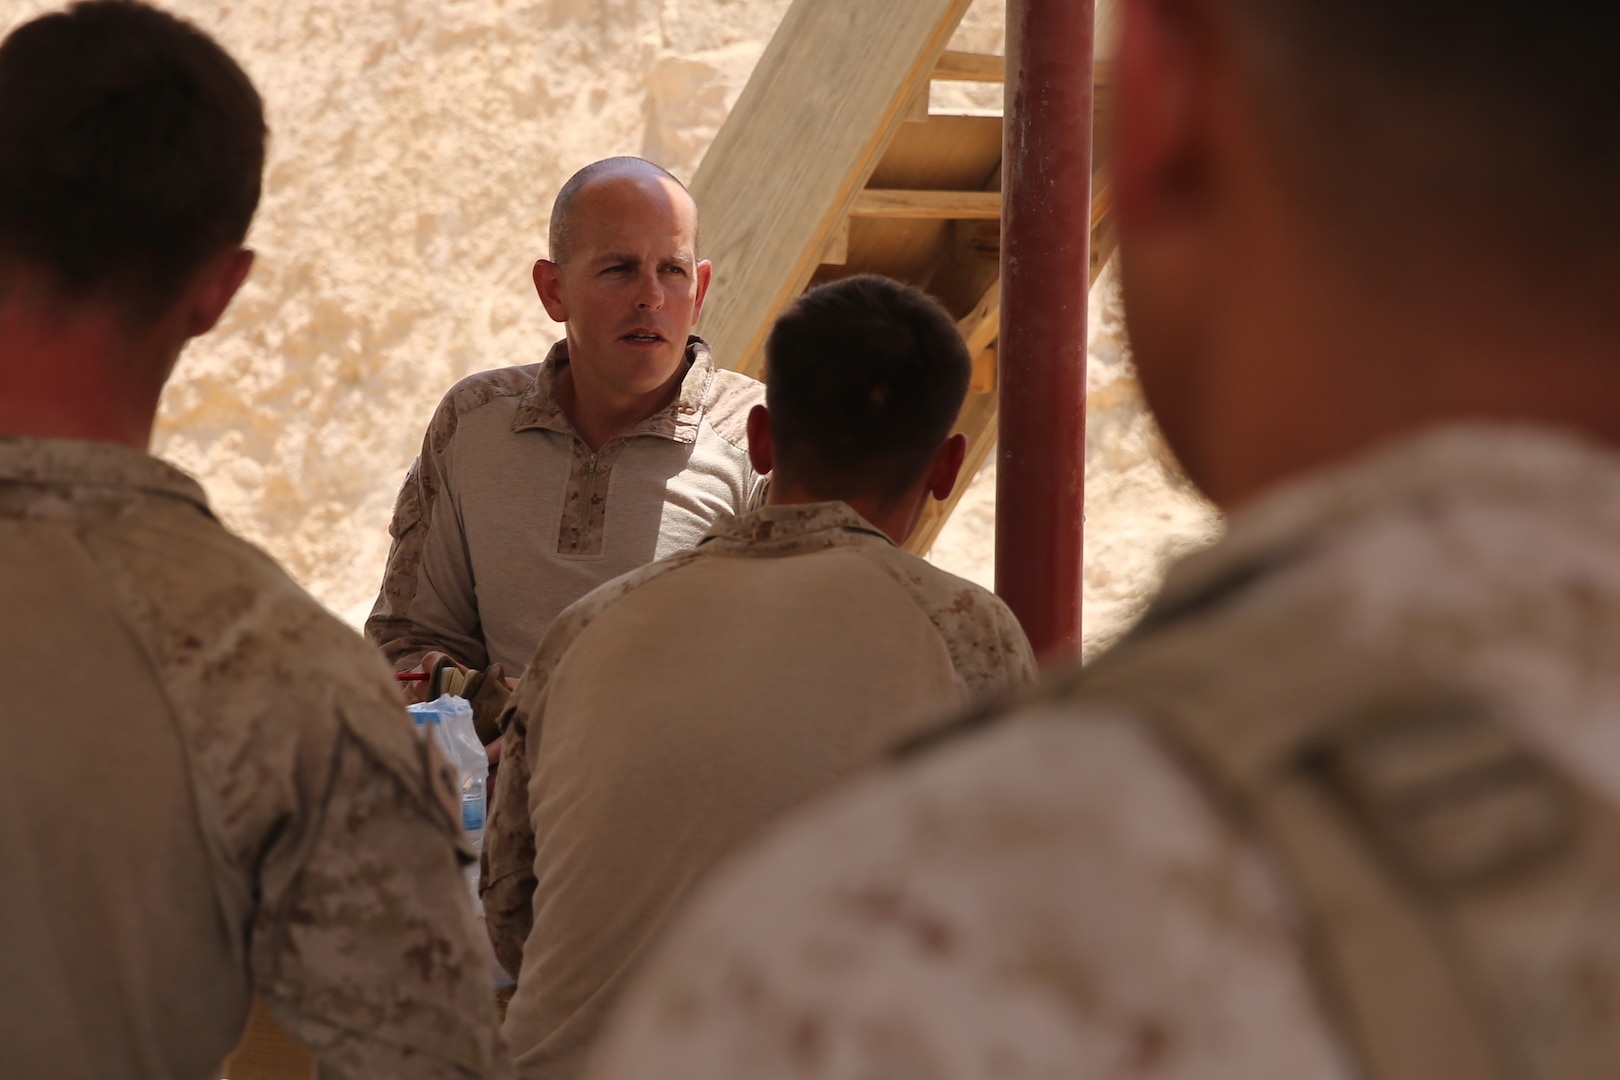 U.S. Marine Corps Gunnery Sgt. Tracy Cazee, security force detachment operations chief attached to Task Force Al Asad with 1st Battalion, 7th Marine Regiment, from Special Purpose Marine Air-Ground Task Force-Crisis Response-Central Command, briefs his Marines prior to assuming their security positions while at Al Asad Air Base, Iraq, July 5, 2017. These Marines are part of the Task Force’s coalition security force team in charge of providing security to the base and personnel onboard. Task Force Al Asad’s mission is to advise and assist  and build partner capacity with the Iraqi Security Forces in Al Anbar province in support of Combined Joint Task Force-Operation Inherent Resolve, the global coalition to defeat ISIS in Iraq and Syria. (U.S. Marine Corps photo by 1st Lt. Dave Williams)